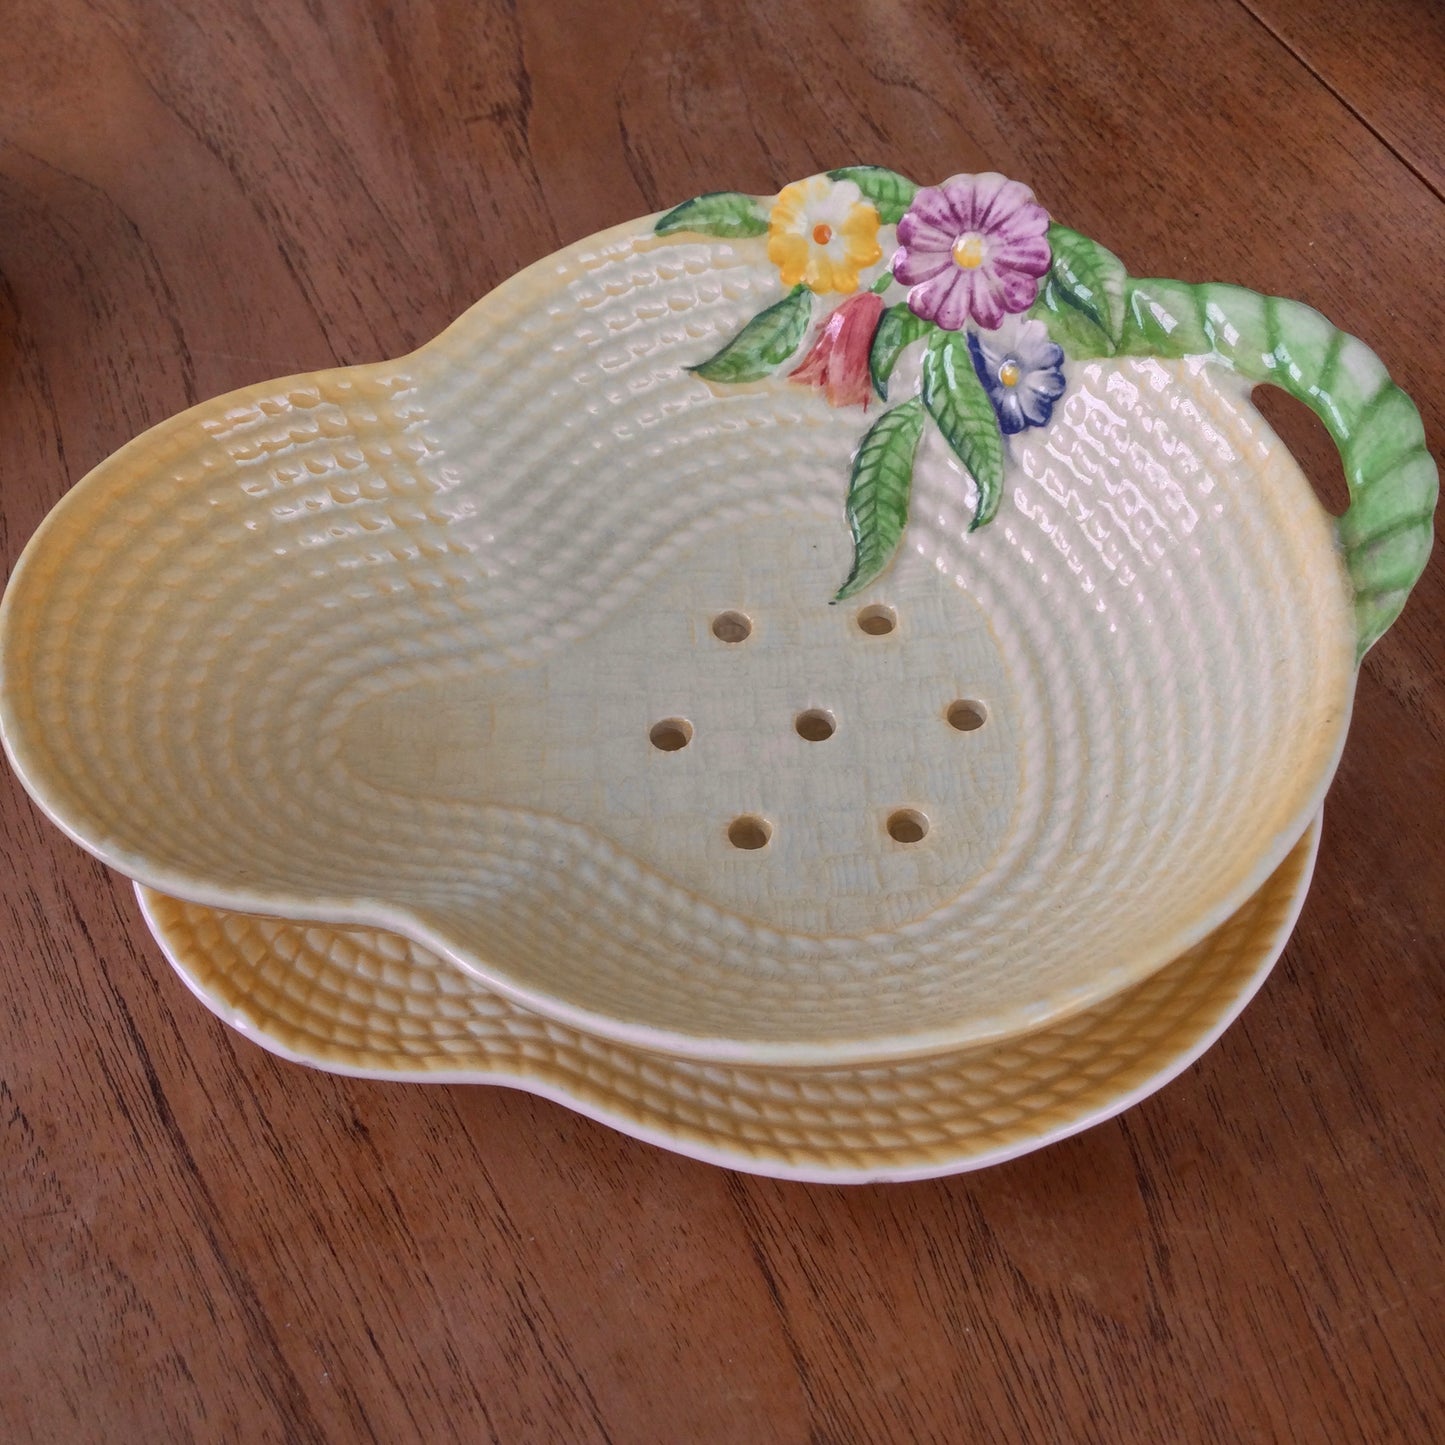 Vintage 1930s Carlton Ware Salad Strainer and Saucer. Yellow basket weave design with Spring flowers